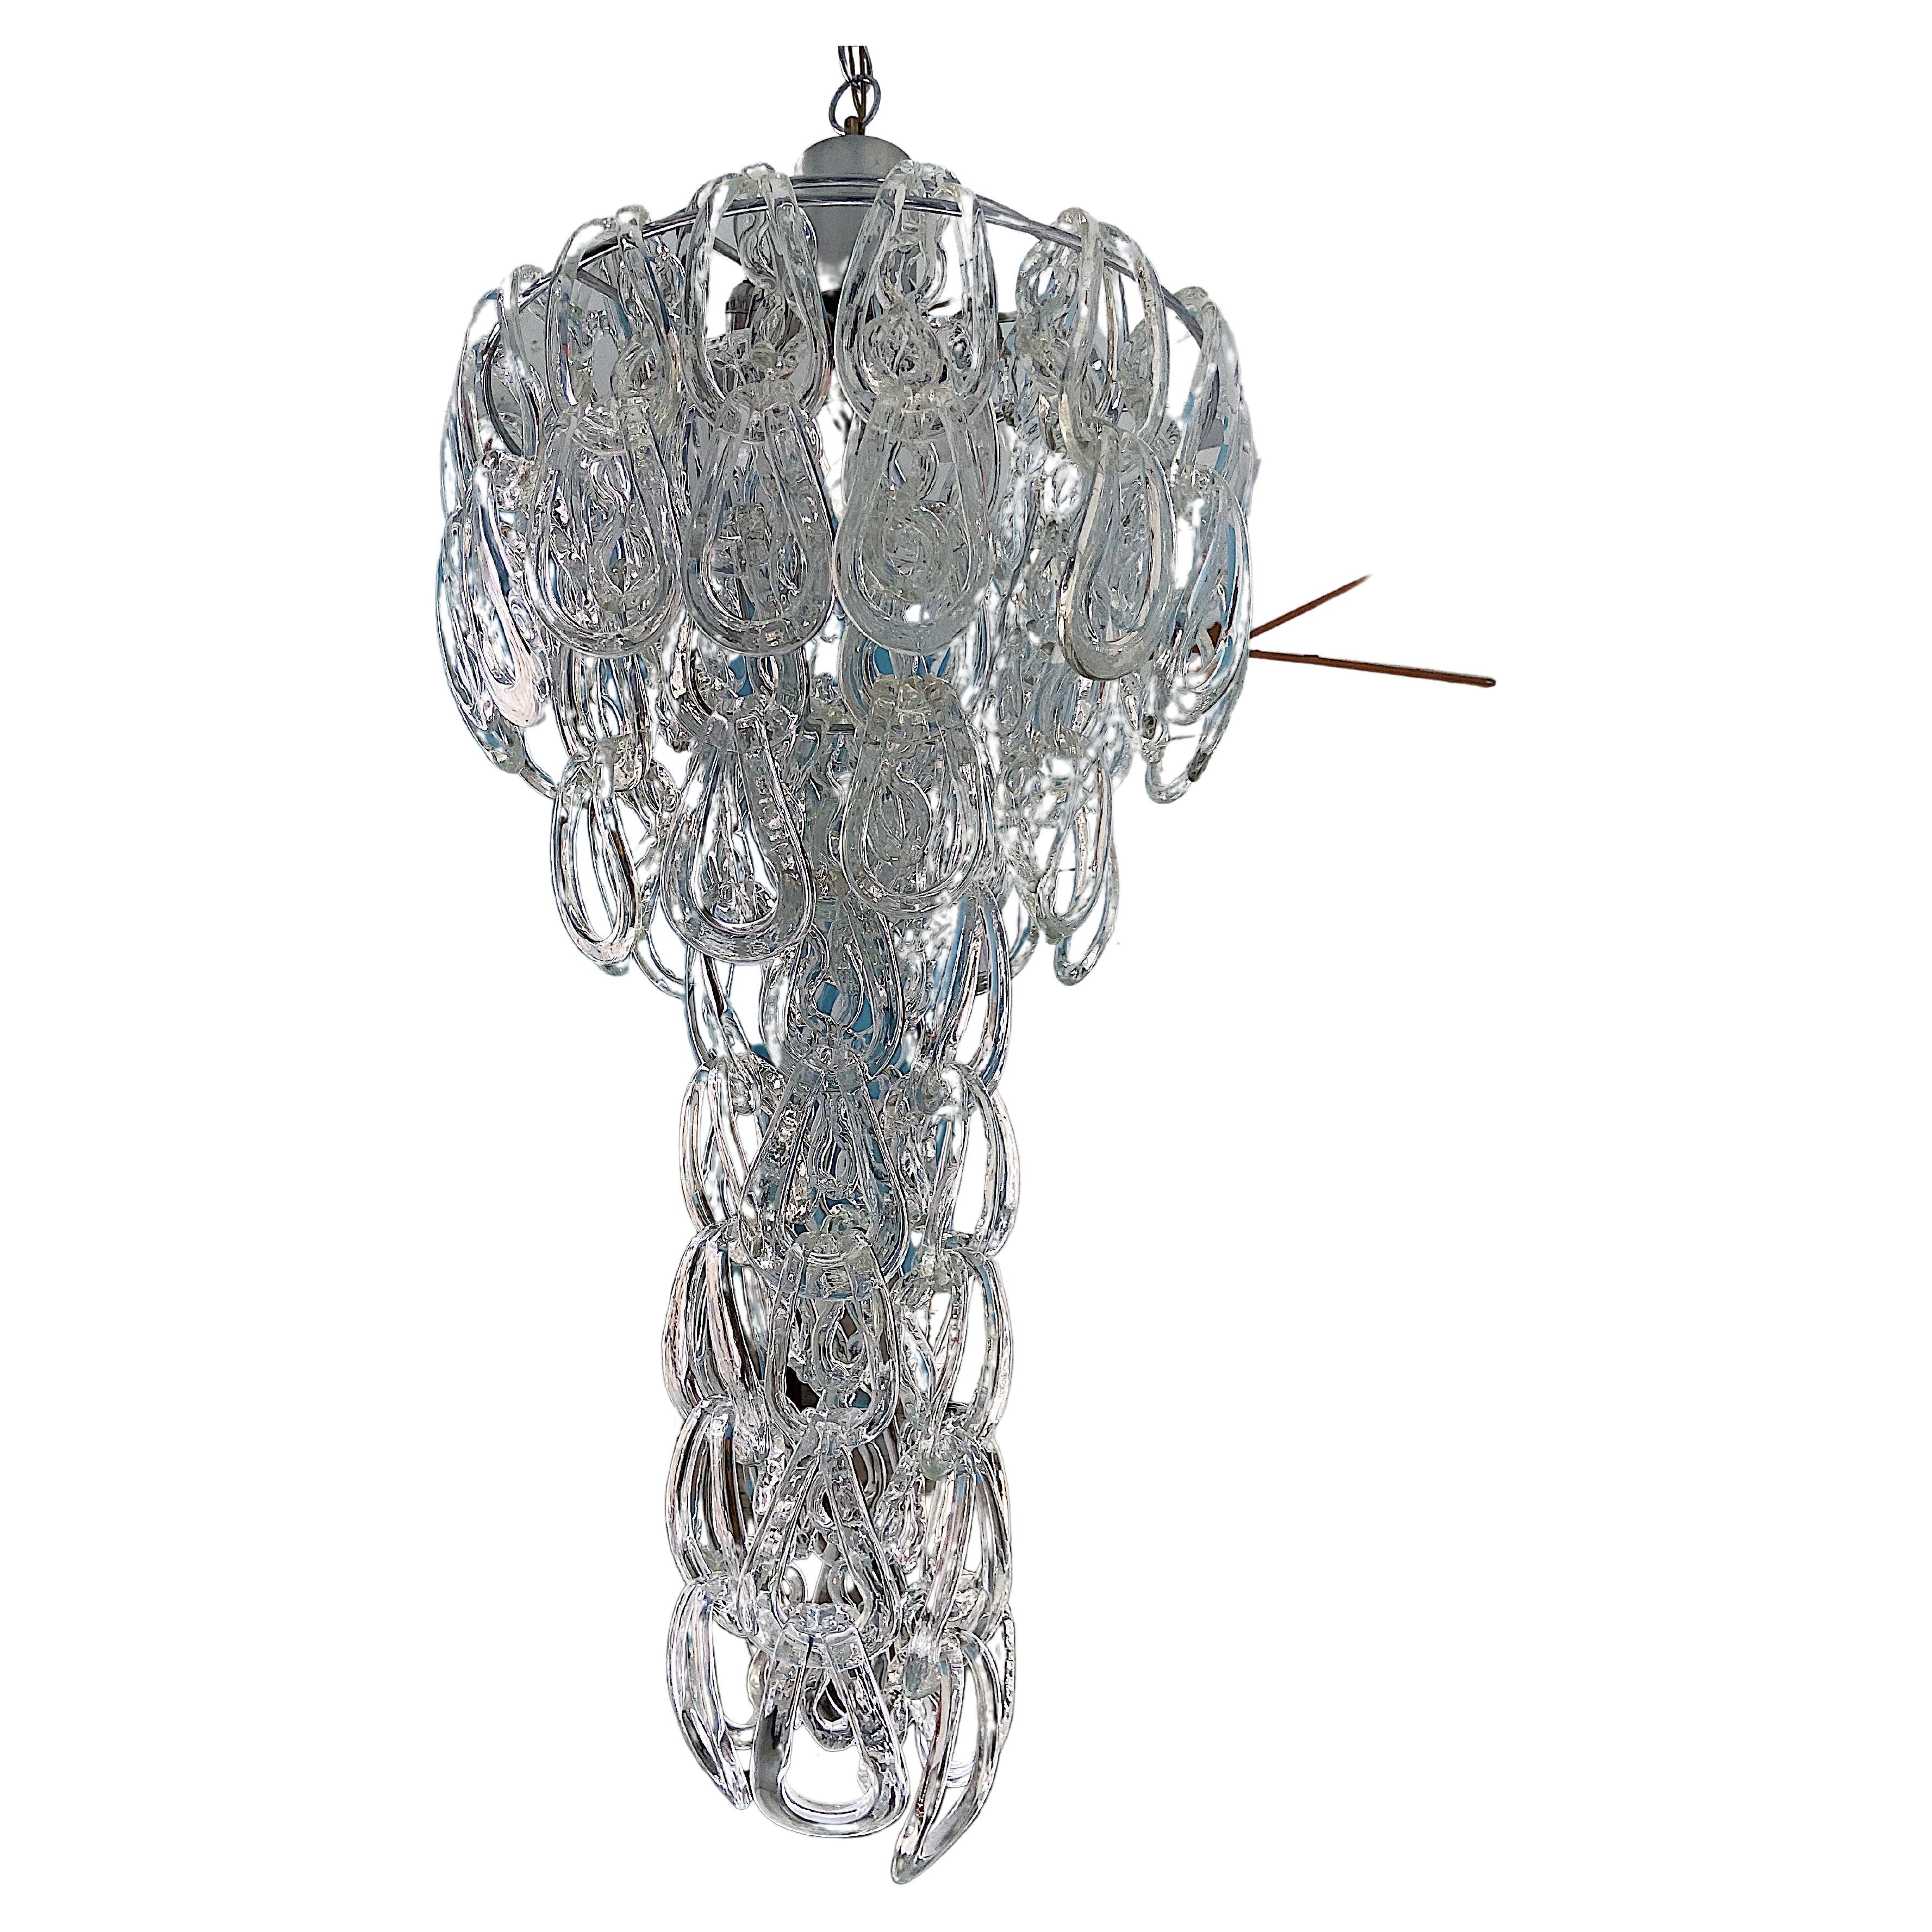 Timeless mid-century chandelier designed by Angelo Mangiarotti for Vistosi, circa 1960.
The elegant Murano glasses can be individually arranged, so that the chandelier can be adapted to different environments room heights according to your own